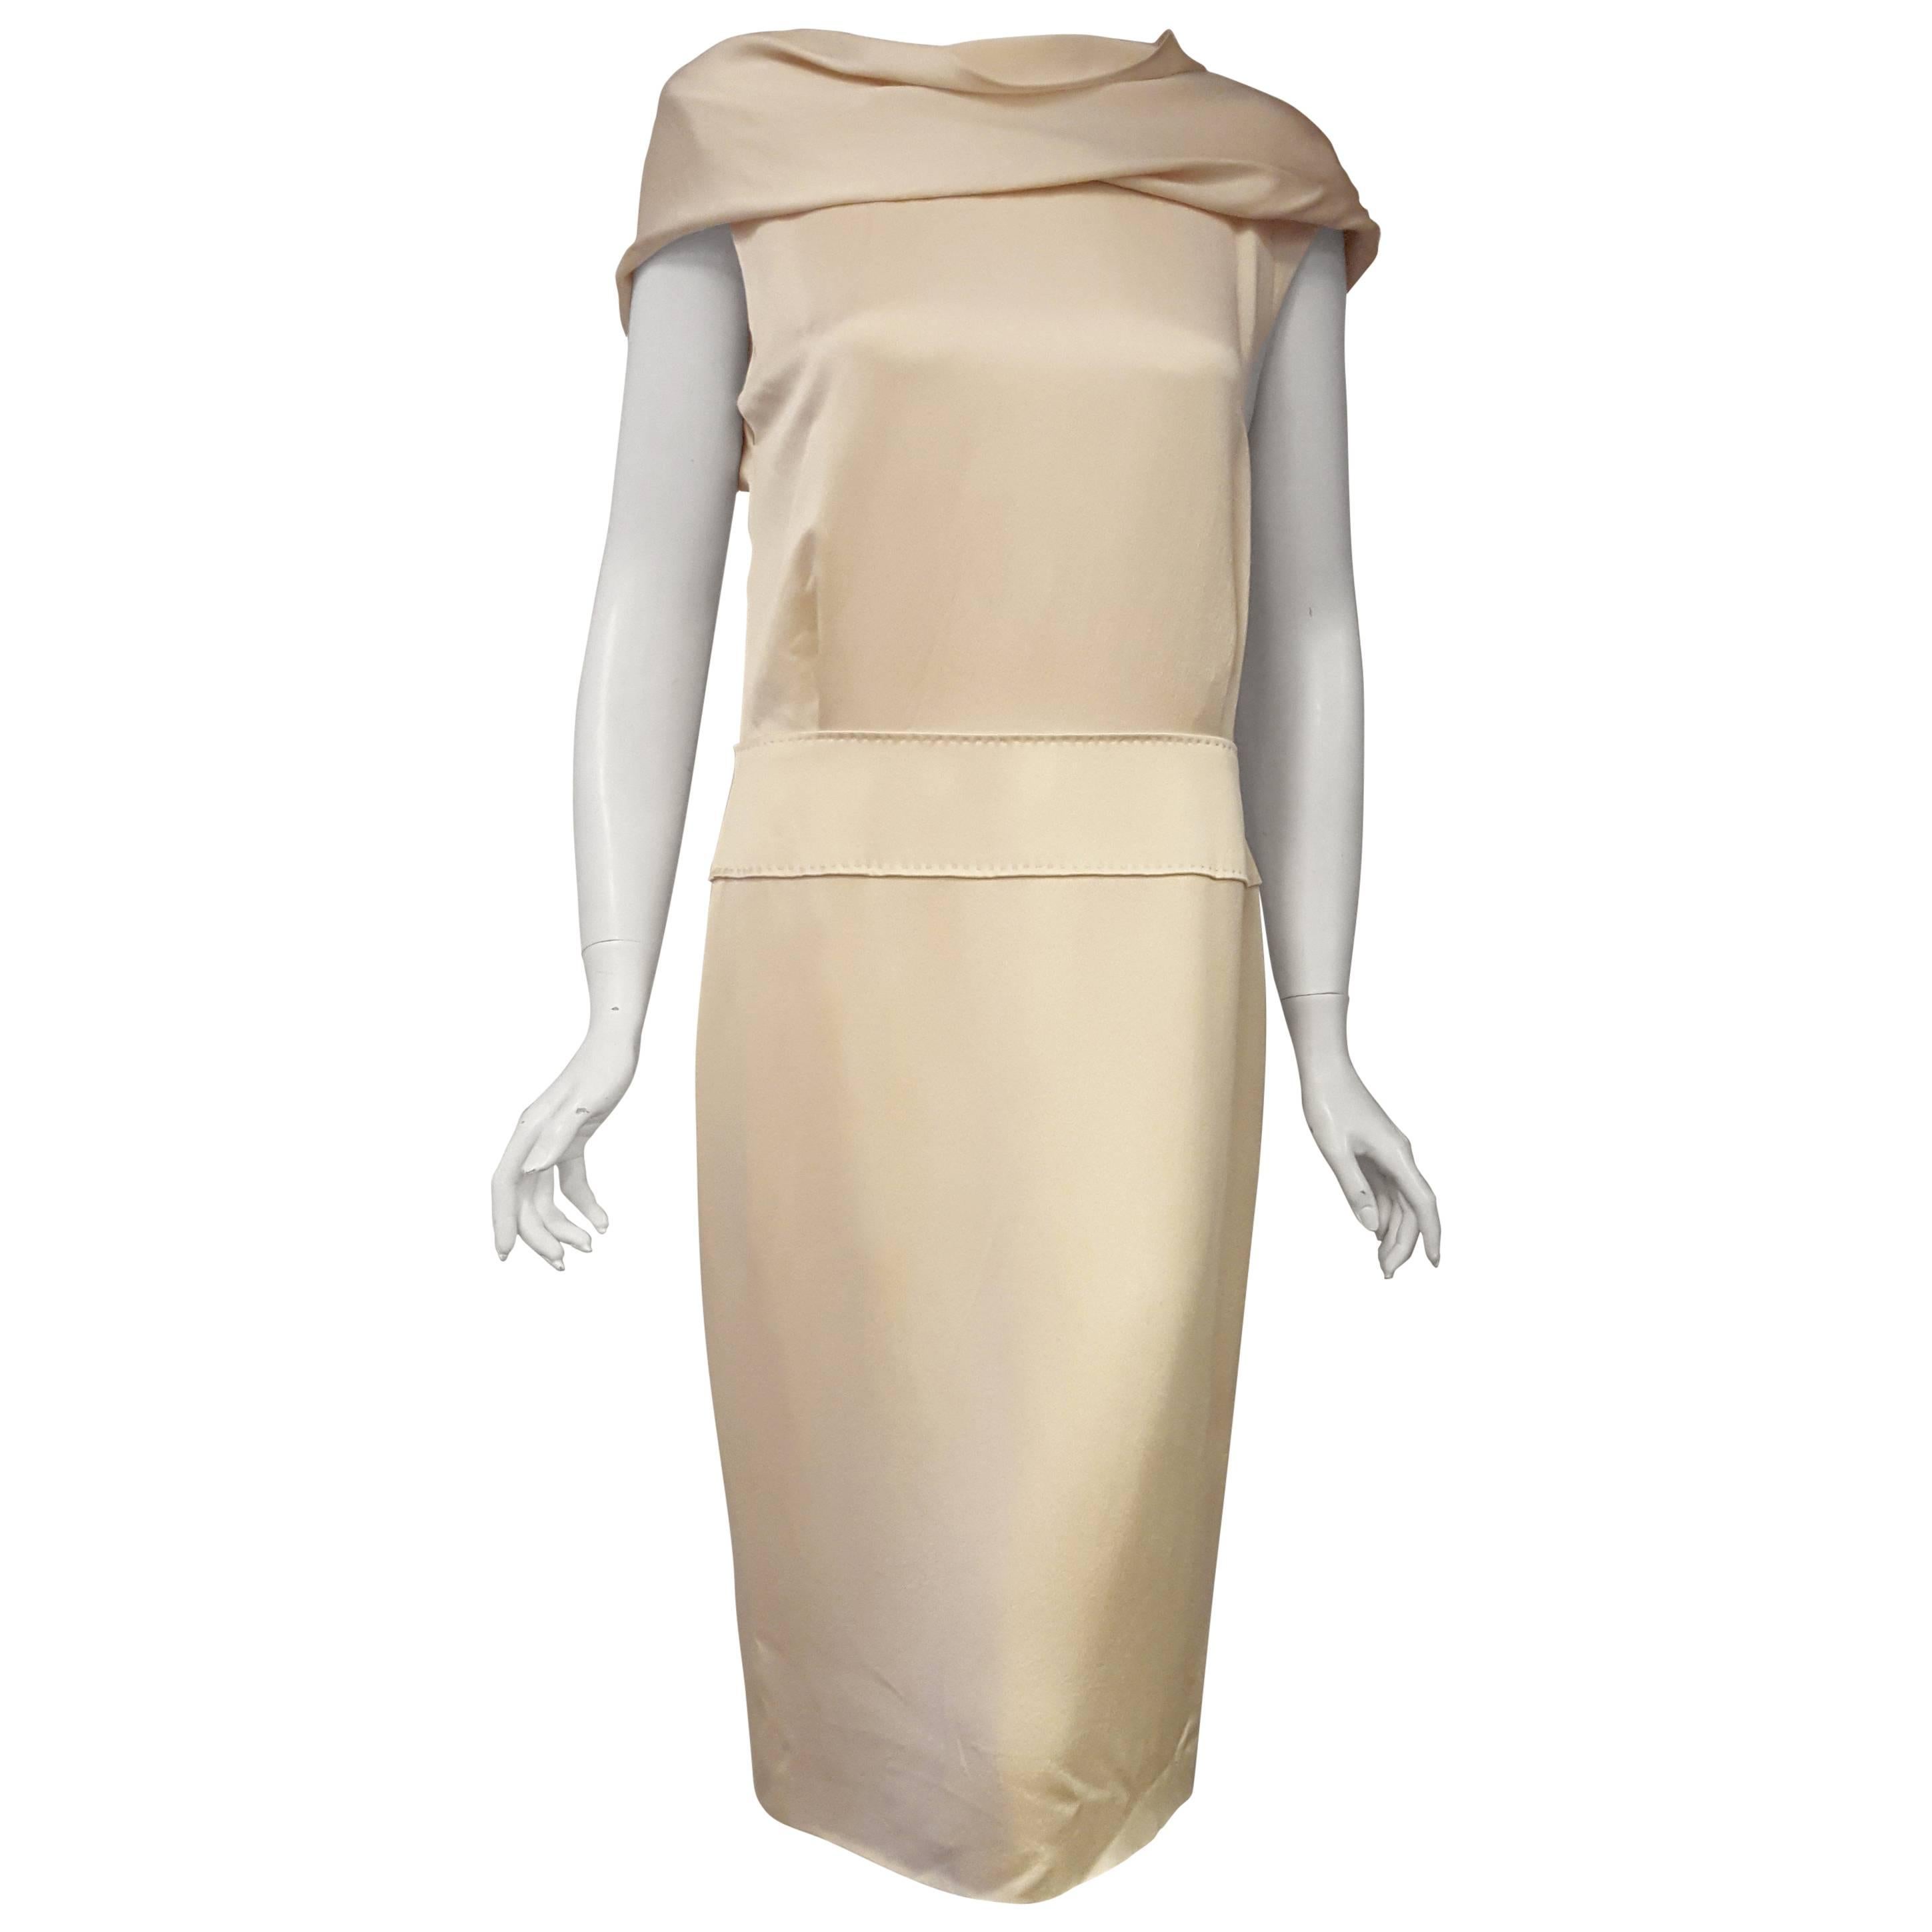 Awesome Alexander McQueen Cowl Neck Beige Hammered Silk Sleeveless Dress  For Sale